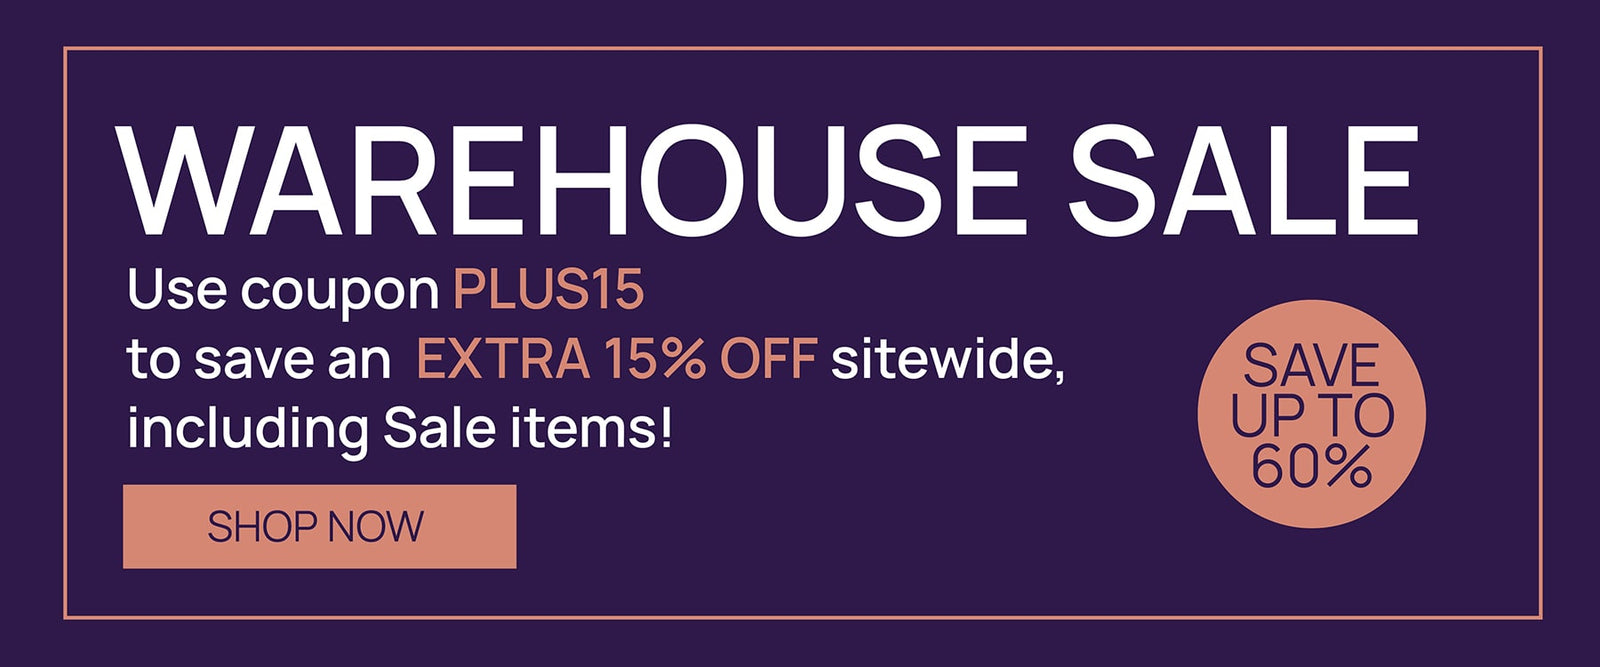 WAREHOUSE SALE Use coupon PLUS15 to save an EXTRA 15% OFF sitewide, including Sale items!